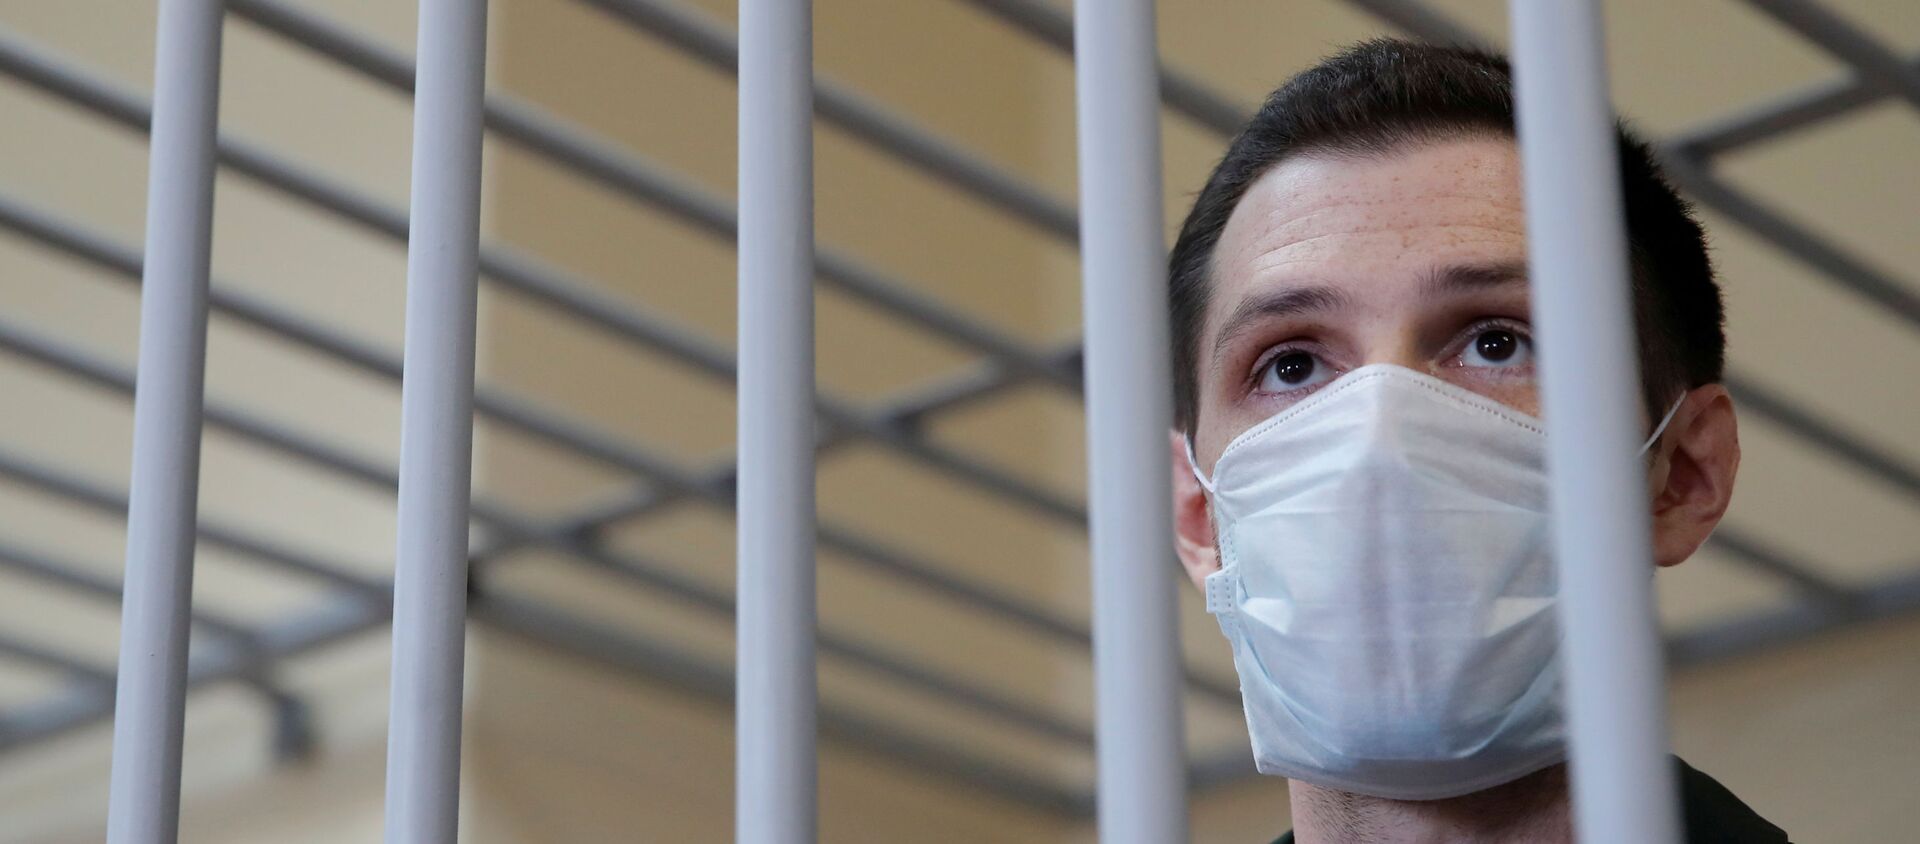 Former U.S. Marine Trevor Reed, who was detained in 2019 and accused of assaulting police officers, stands inside a defendants' cage during a court hearing in Moscow, Russia July 30, 2020. - Sputnik International, 1920, 16.09.2020